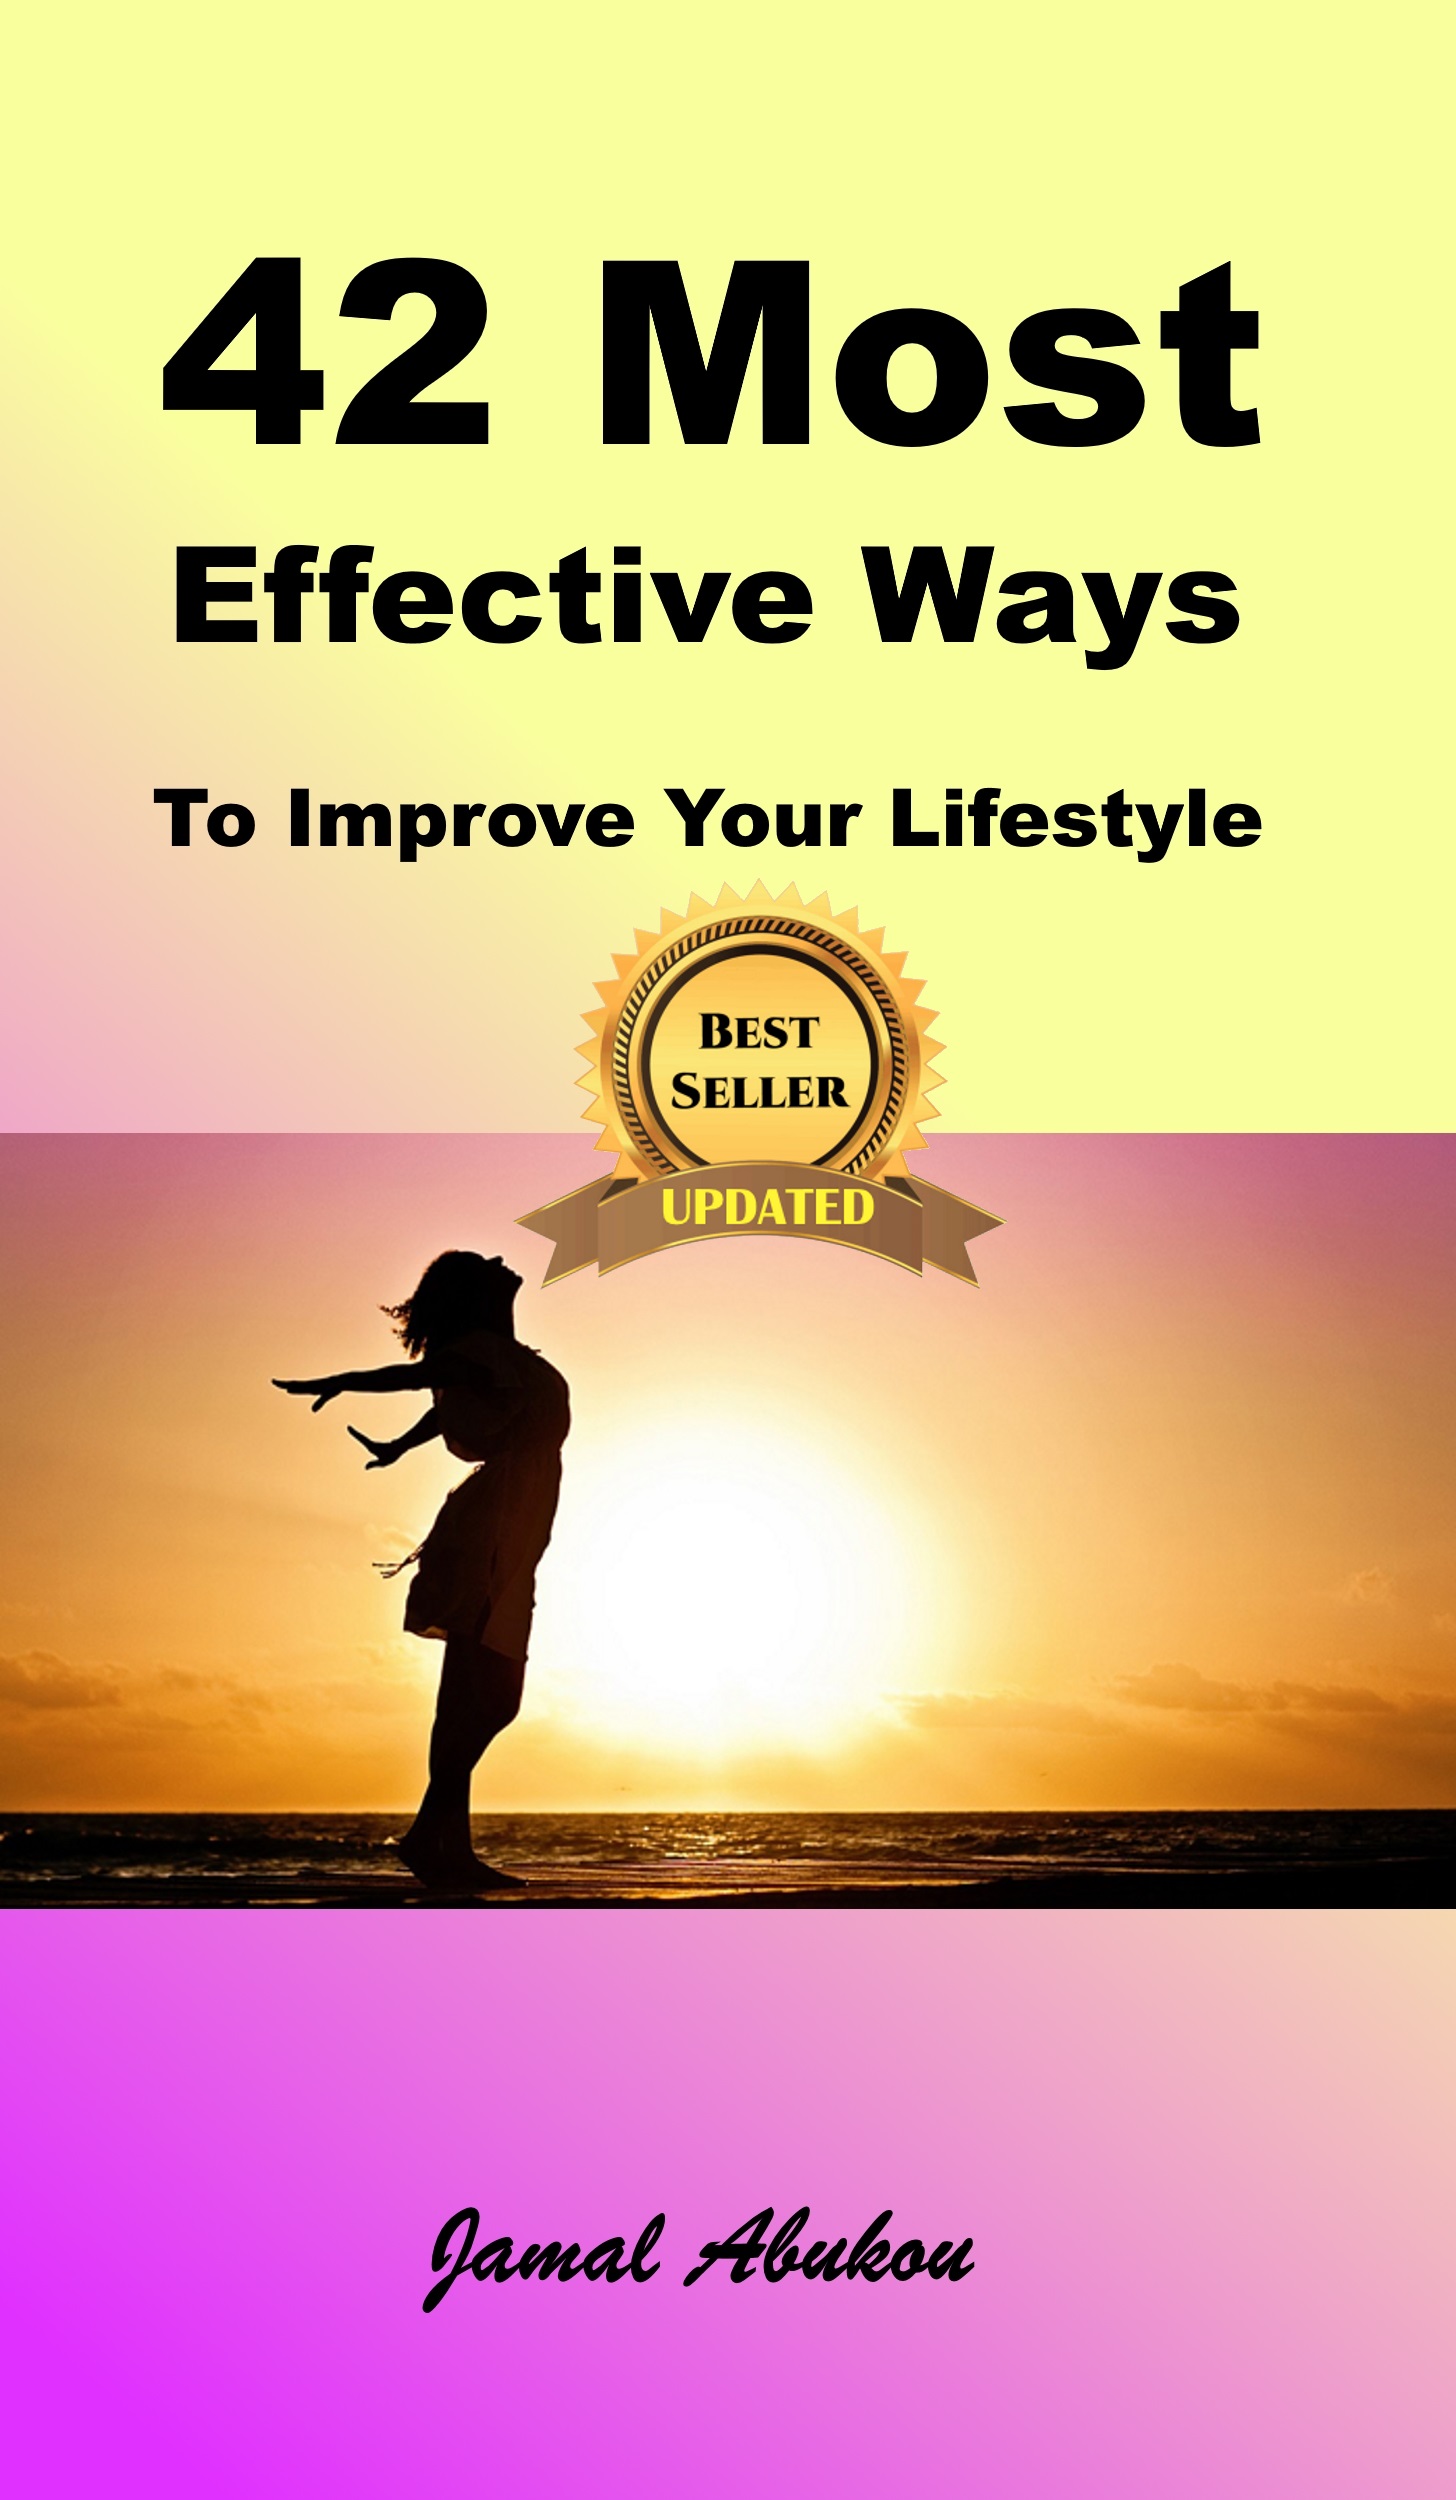 FREE: 42 Most Effective Ways To Improve Your Lifestyle by Jamal Abukou